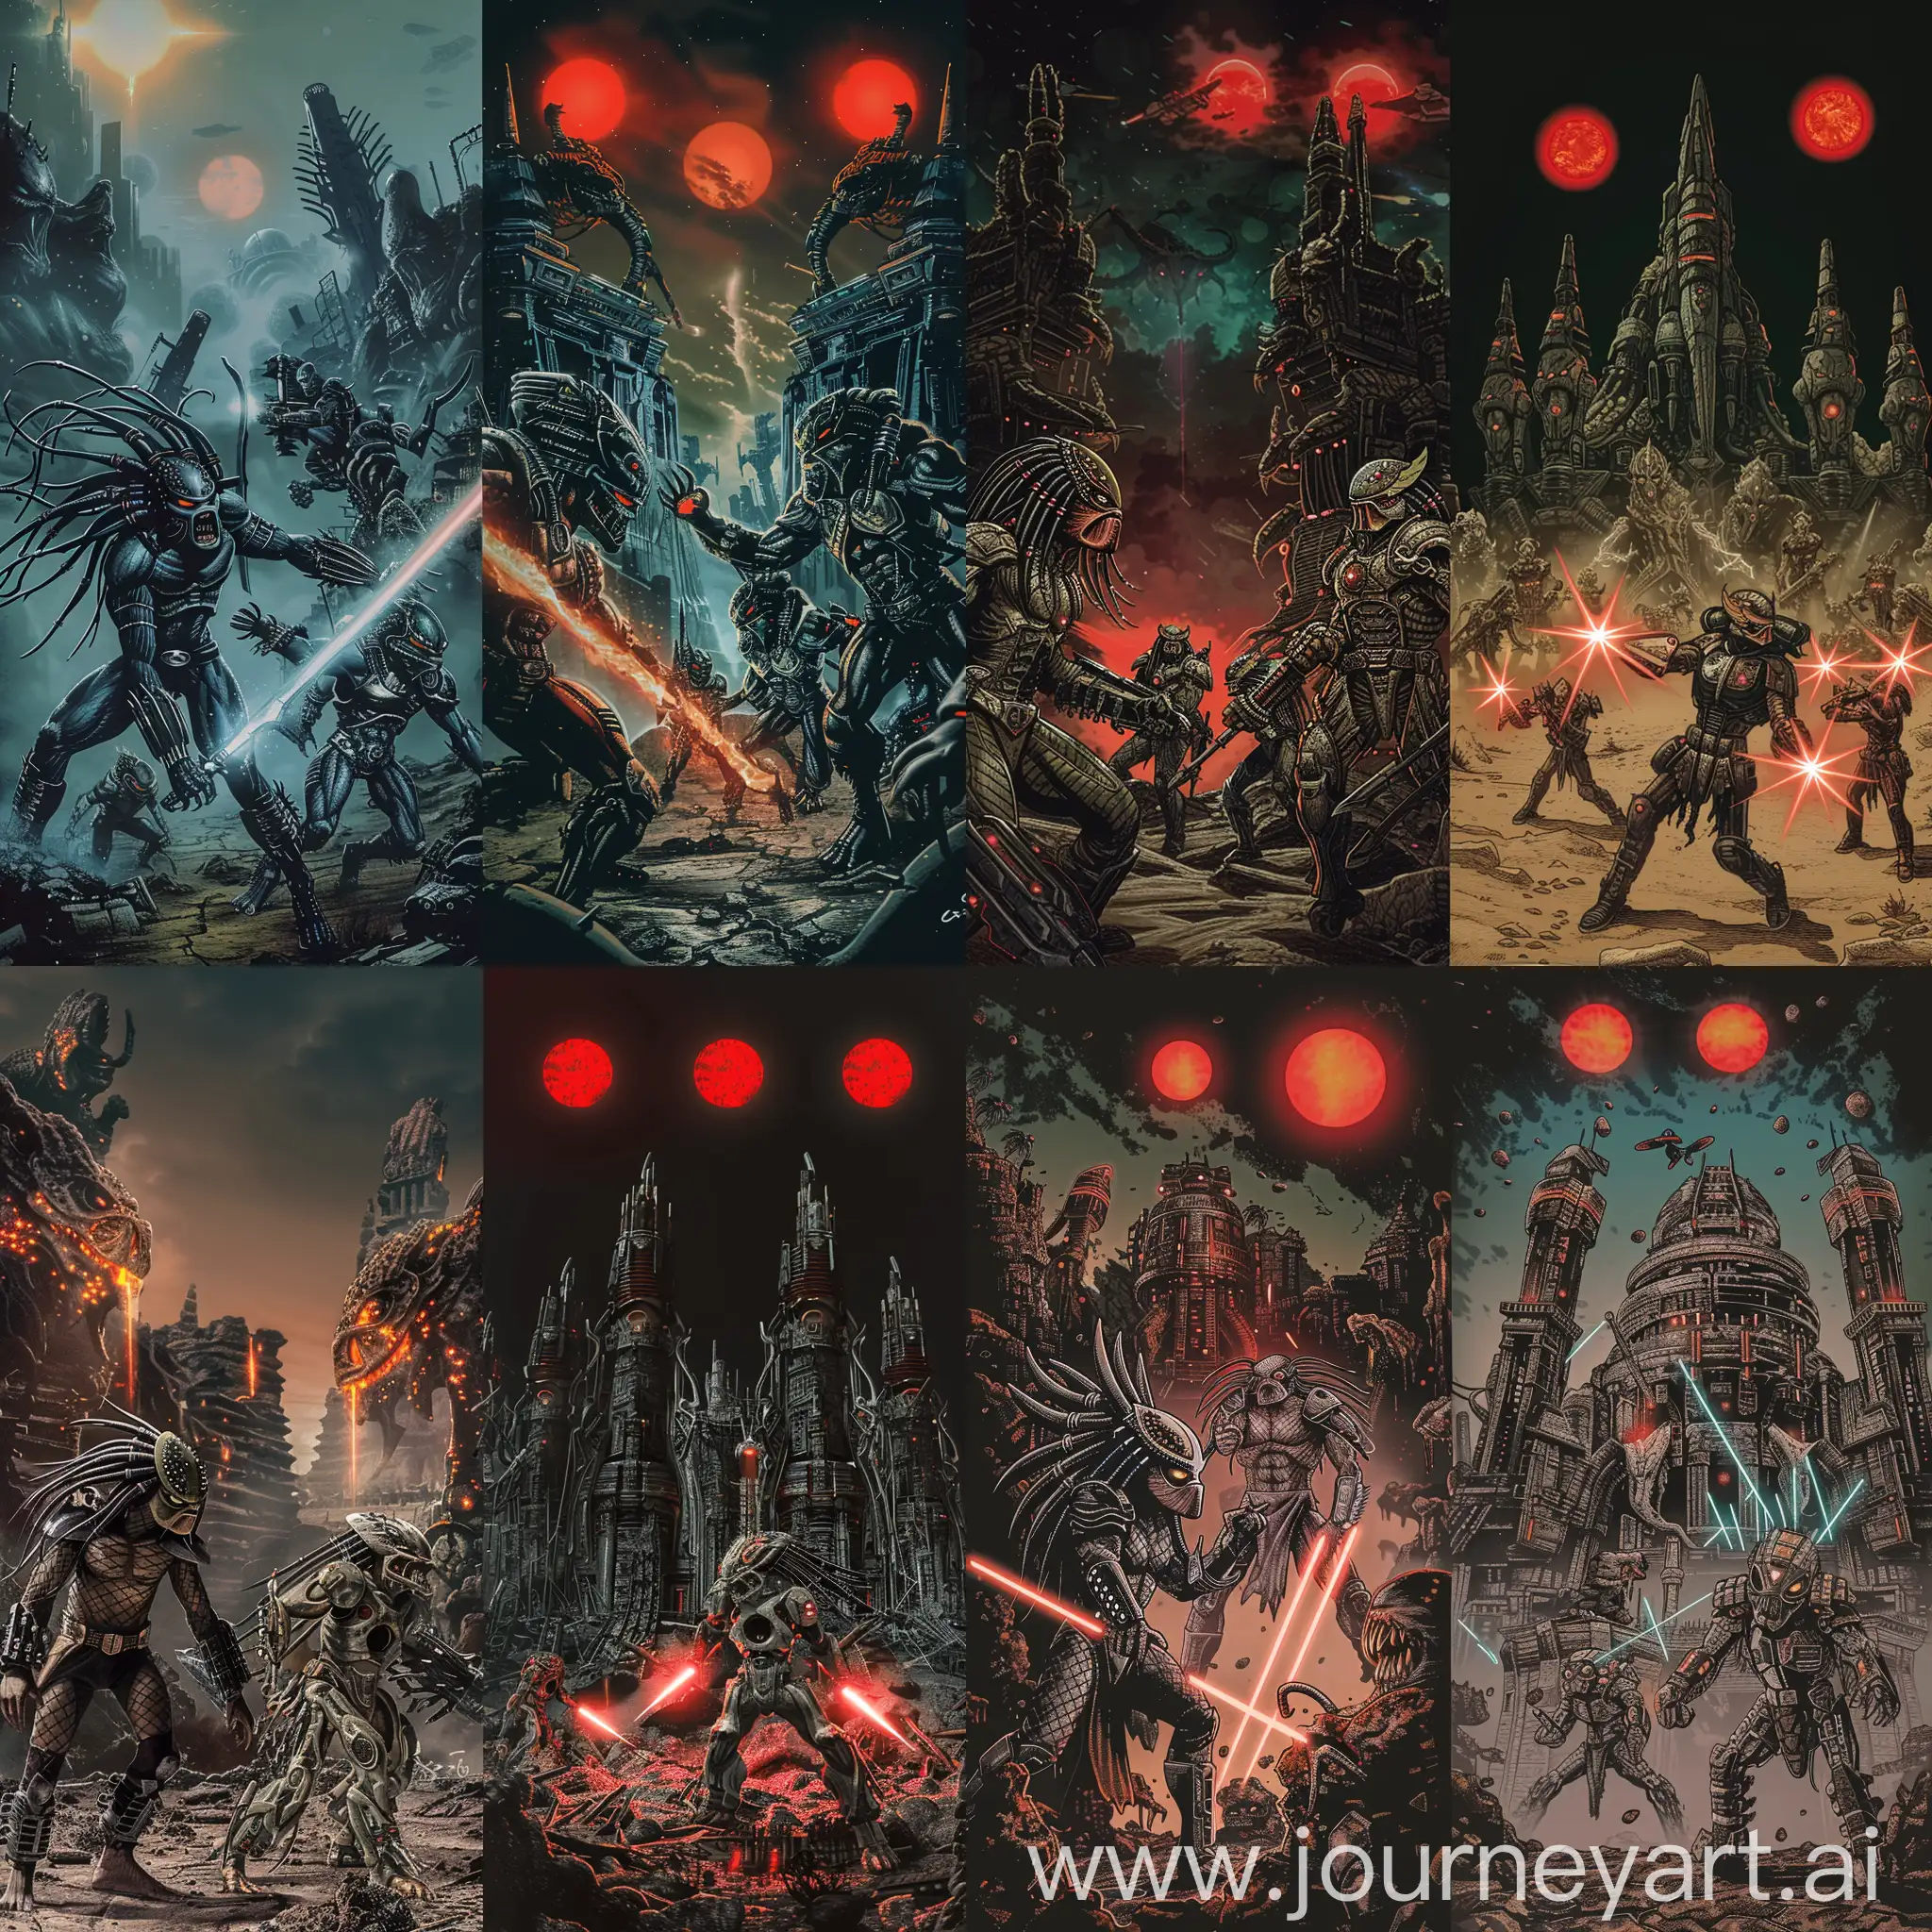 At left, there are several Predator warriors from the Predators movie.

At right, there are several Protoss zealots from the StarCraft game.

They are fighting against each other with their energetic blades.

They are on an apocalyptic abandoned planet.

Background as cyper punk style steel temples in ruin.

Three red suns in the dark sky.